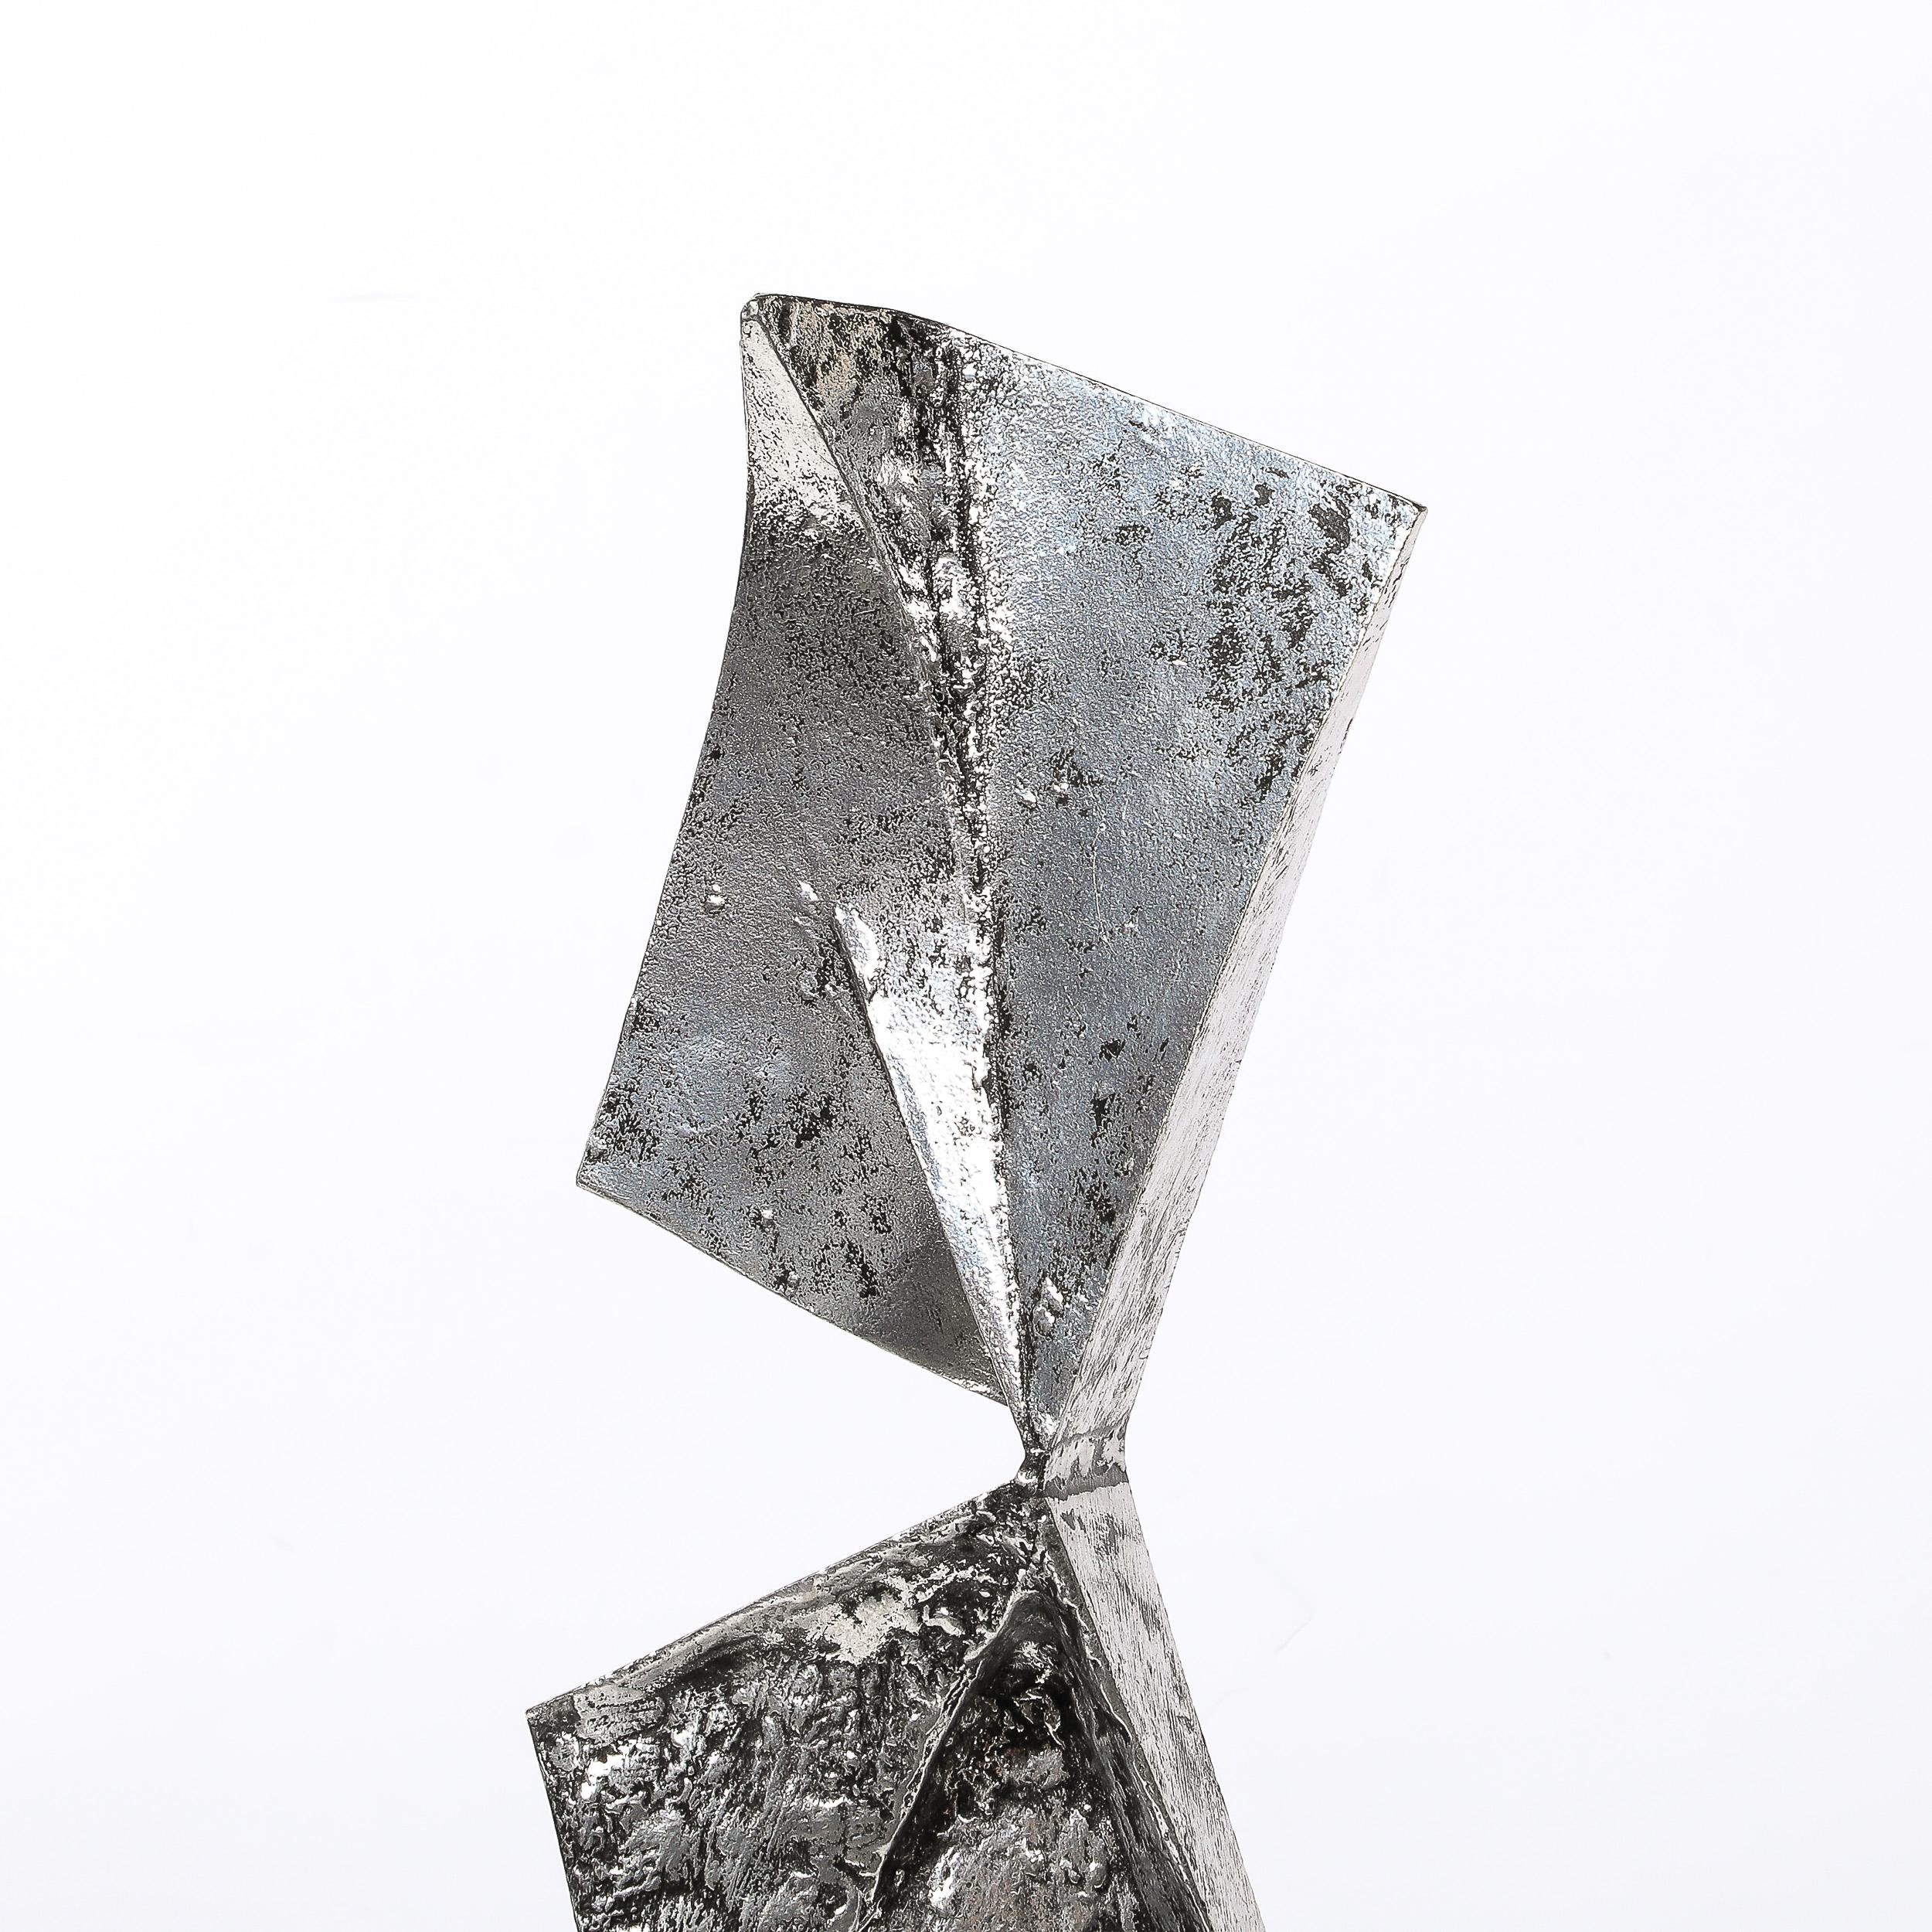 This sharp and angular Mid-Century Modernist Abstract Geometric Sculpture in Cast and Welded Aluminum by Arthur Court originates from the United States, Circa 1975. Features a vertical composition in abstracted triangular forms, joined at their